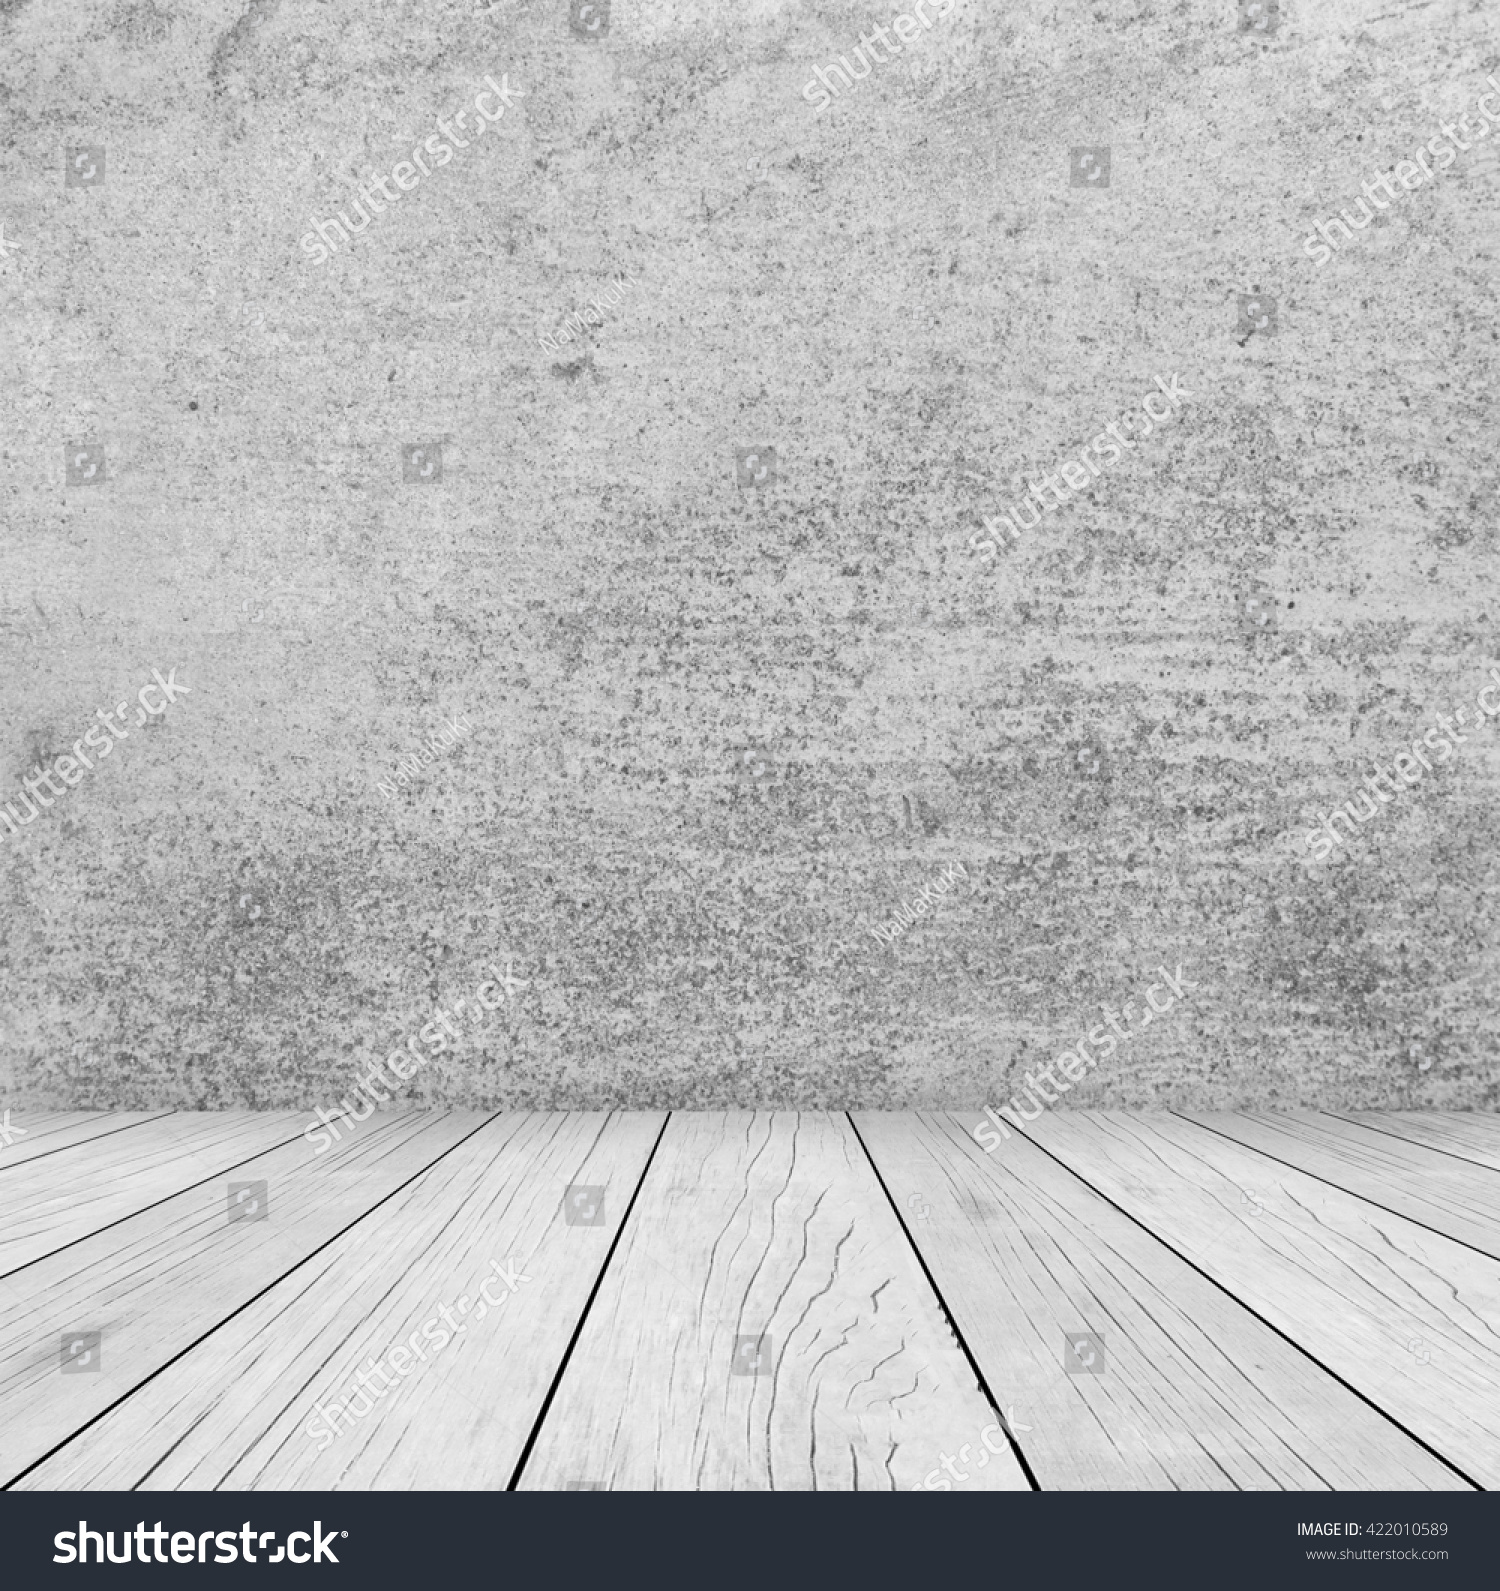 Vintage Room Without Ceiling Gray Grunge Stock Photo (Safe to Use ...